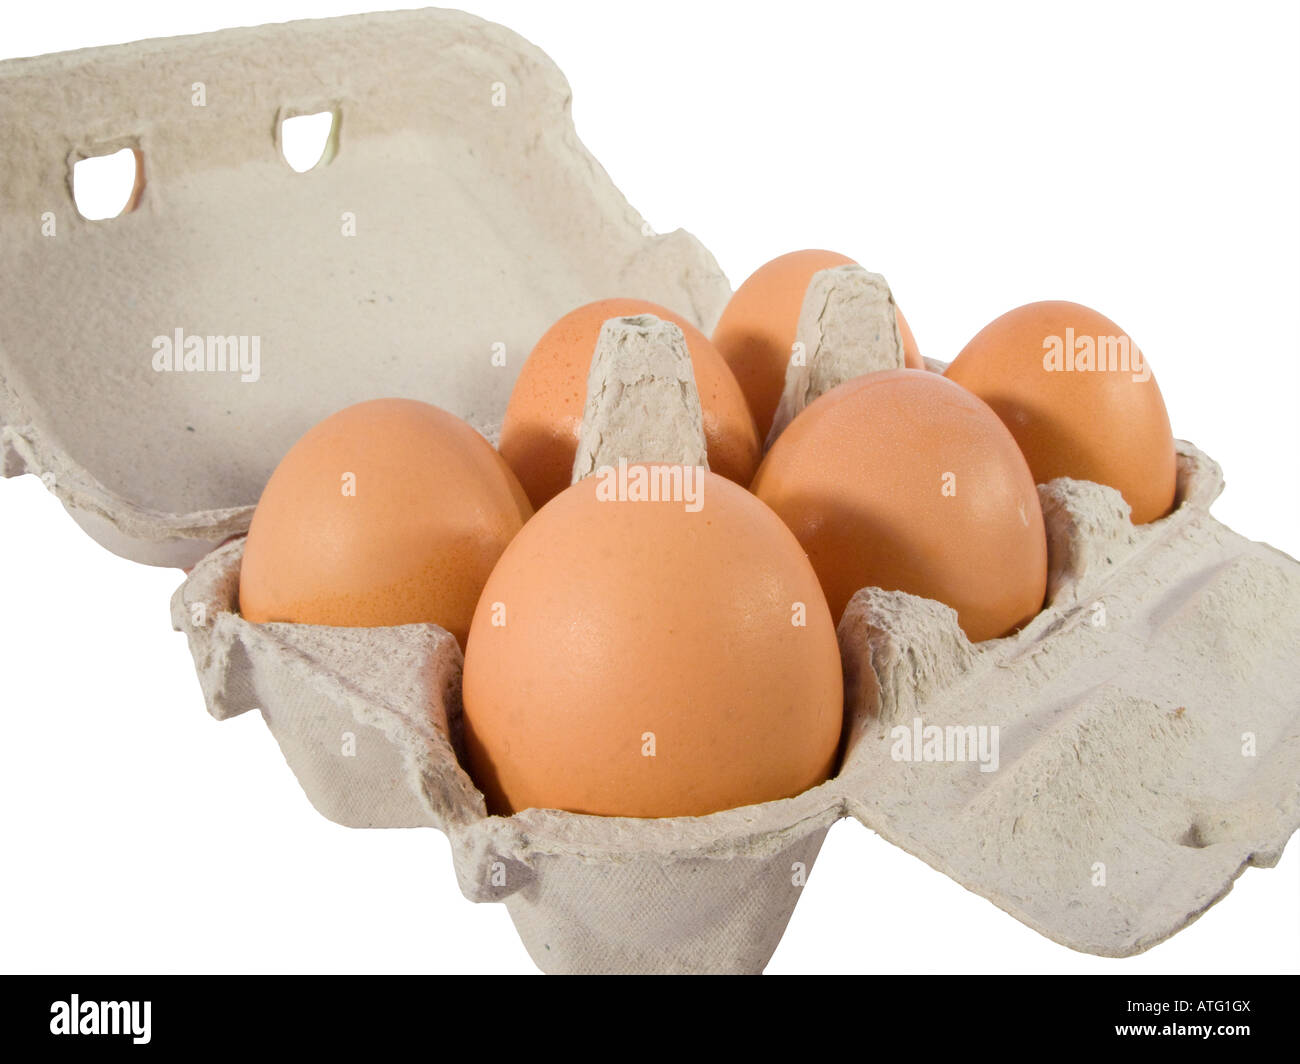 Half dozen fresh eggs in box made of recycled paper Stock Photo